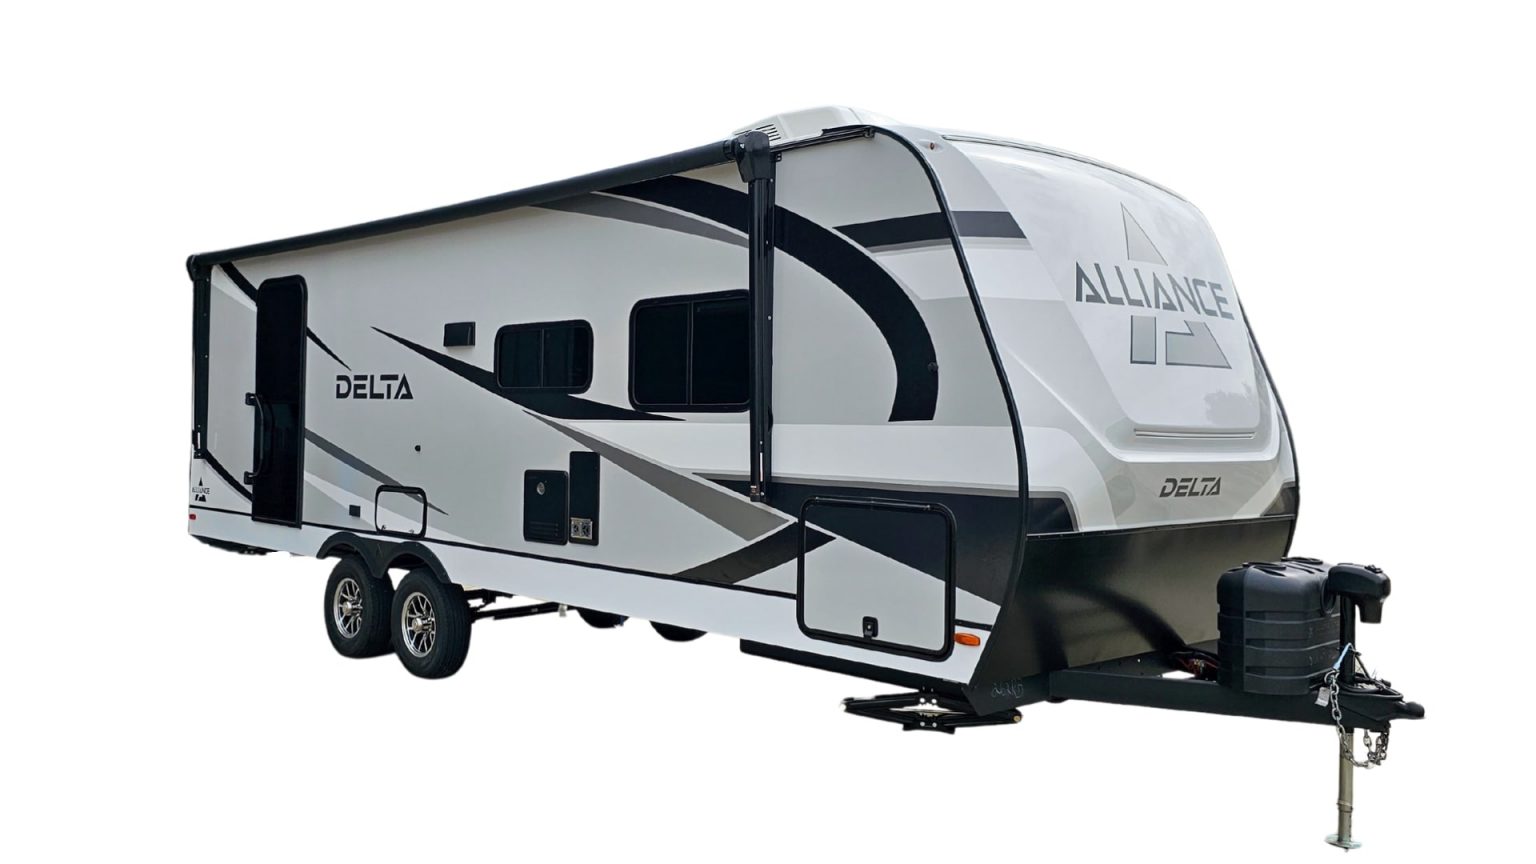 First Look at the New Delta Travel Trailers from Alliance RV